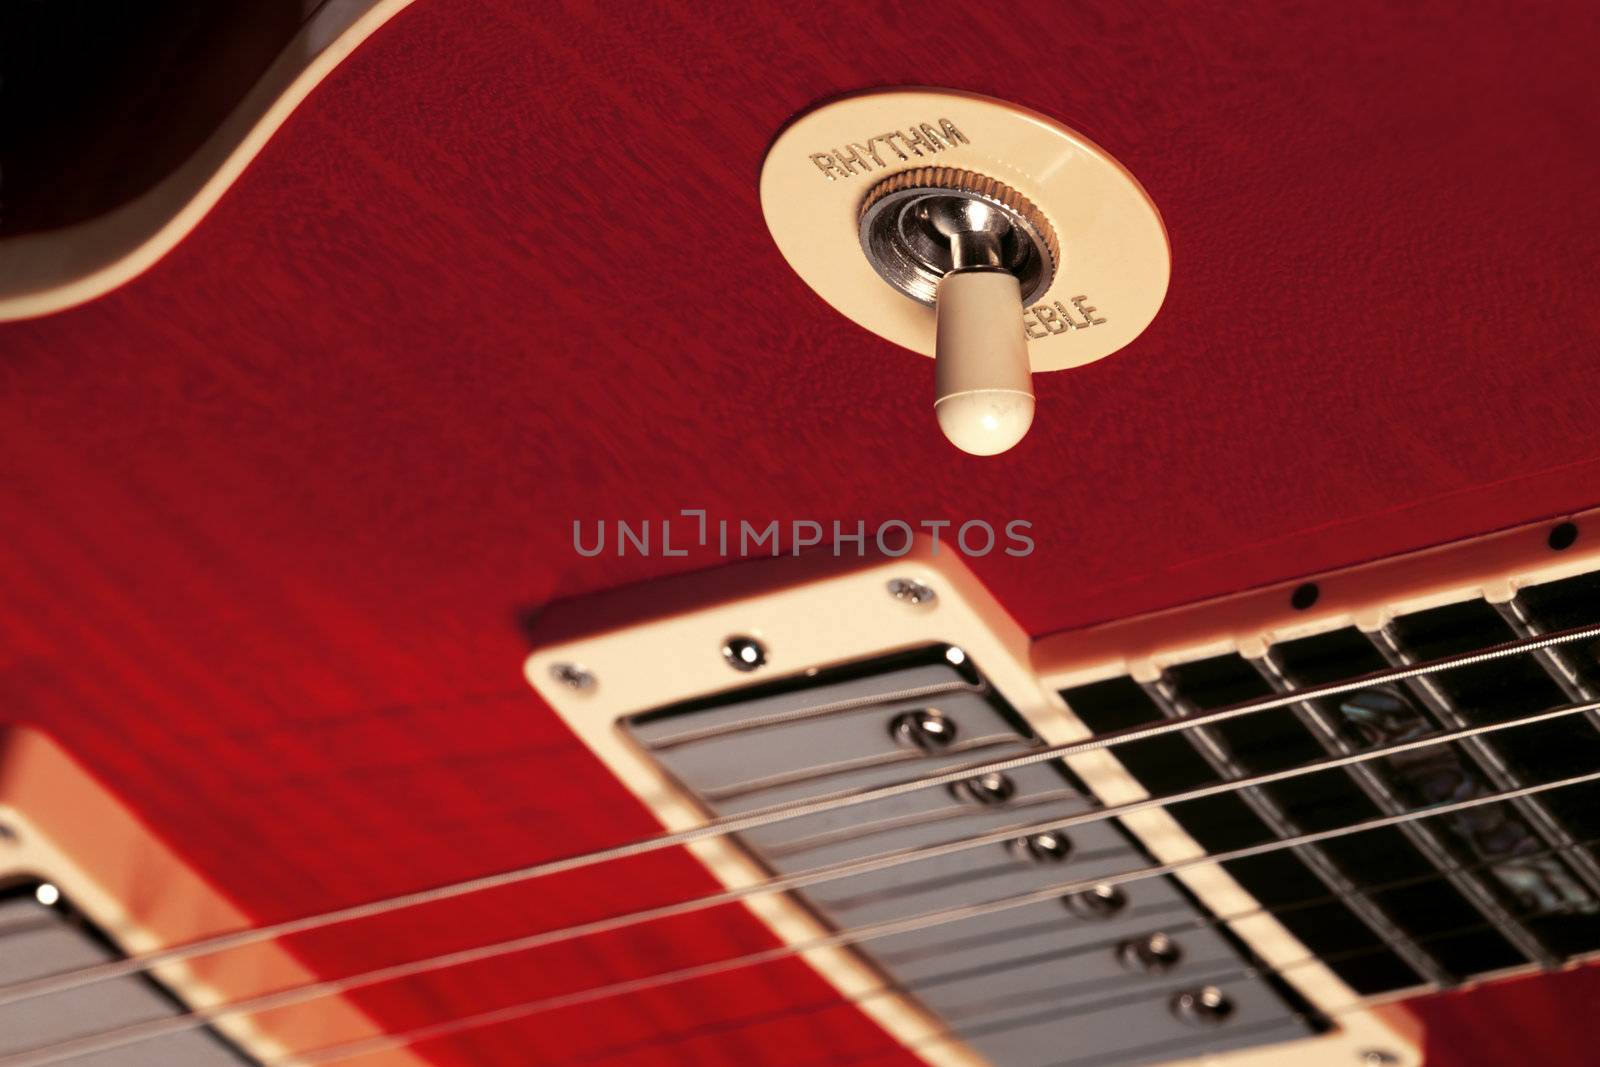 Close-up of the rhythm, treble switch on an electric guitar.